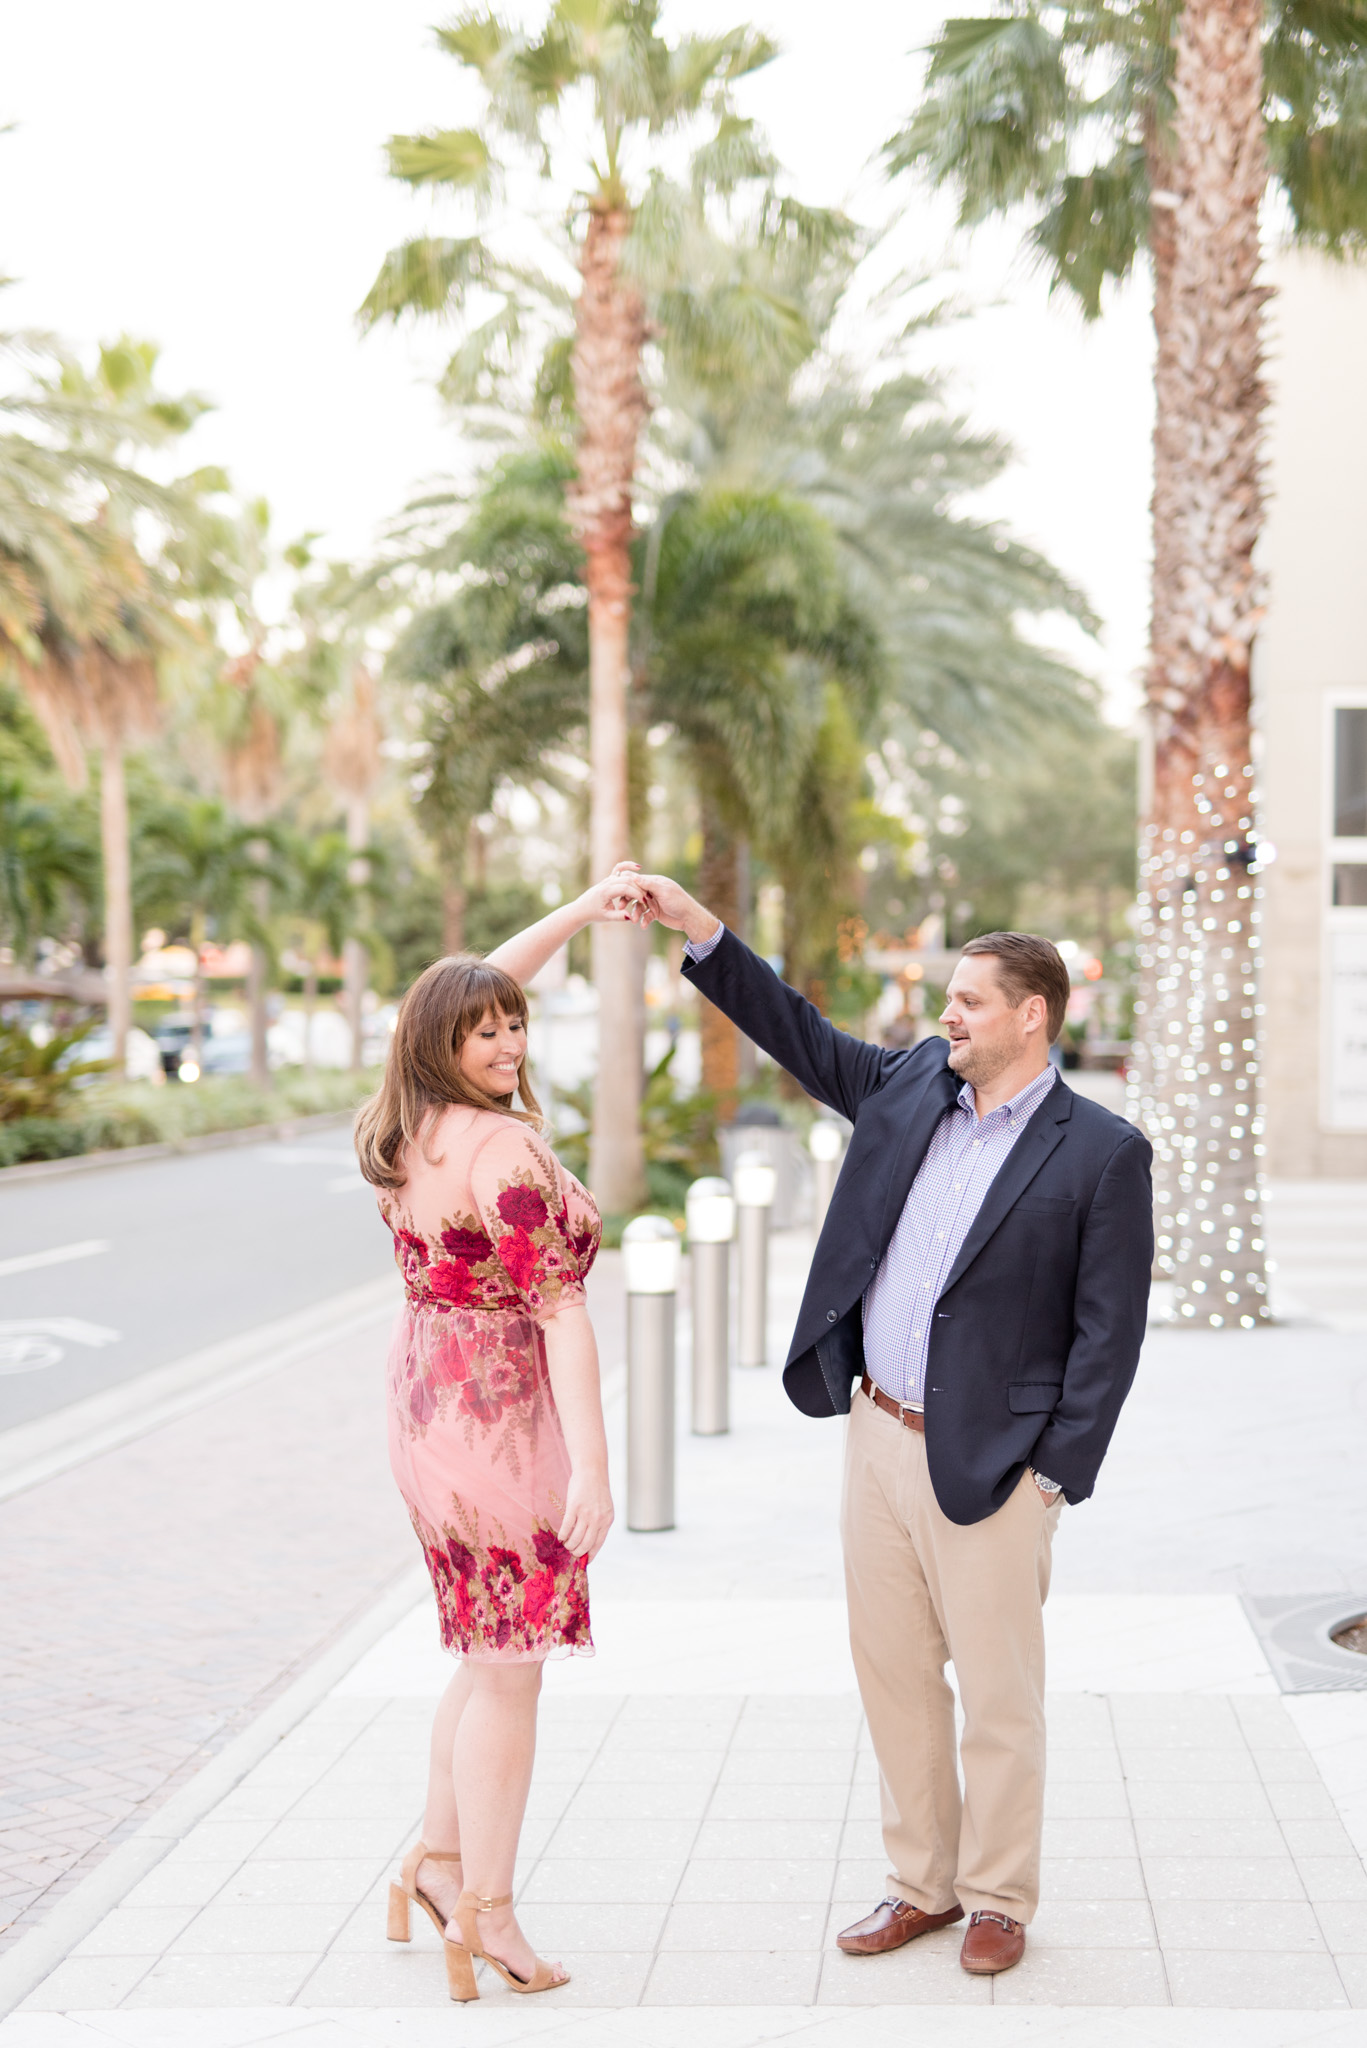 Man twirls his bride-to-be in downtown St. Pete